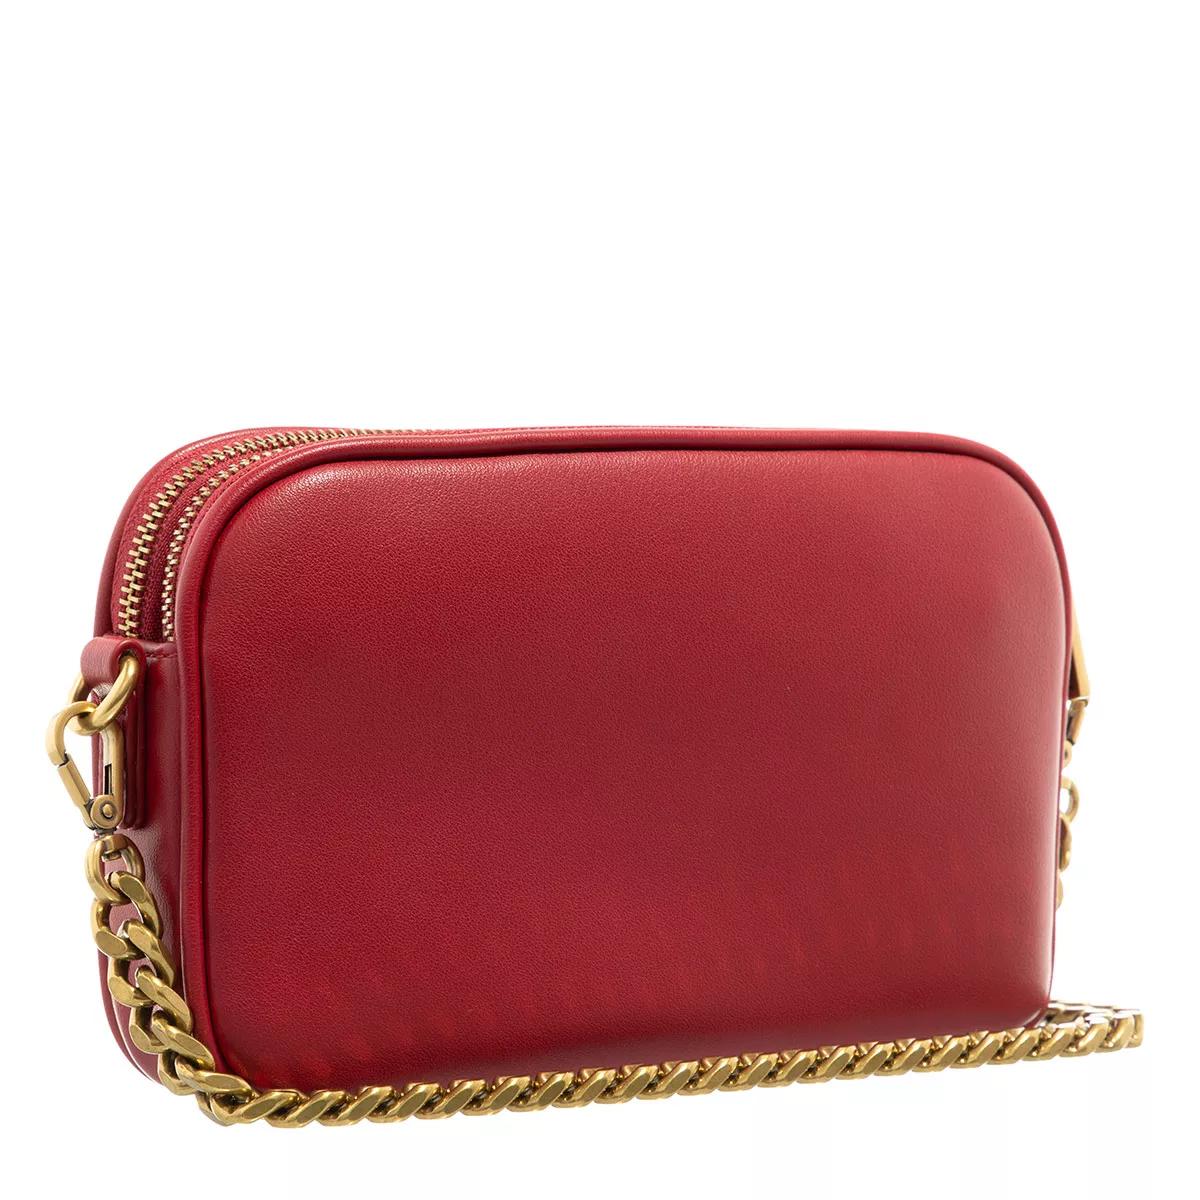 Just Cavalli Crossbody bags Range A Icon Bag Sketch 7 Bags in rood